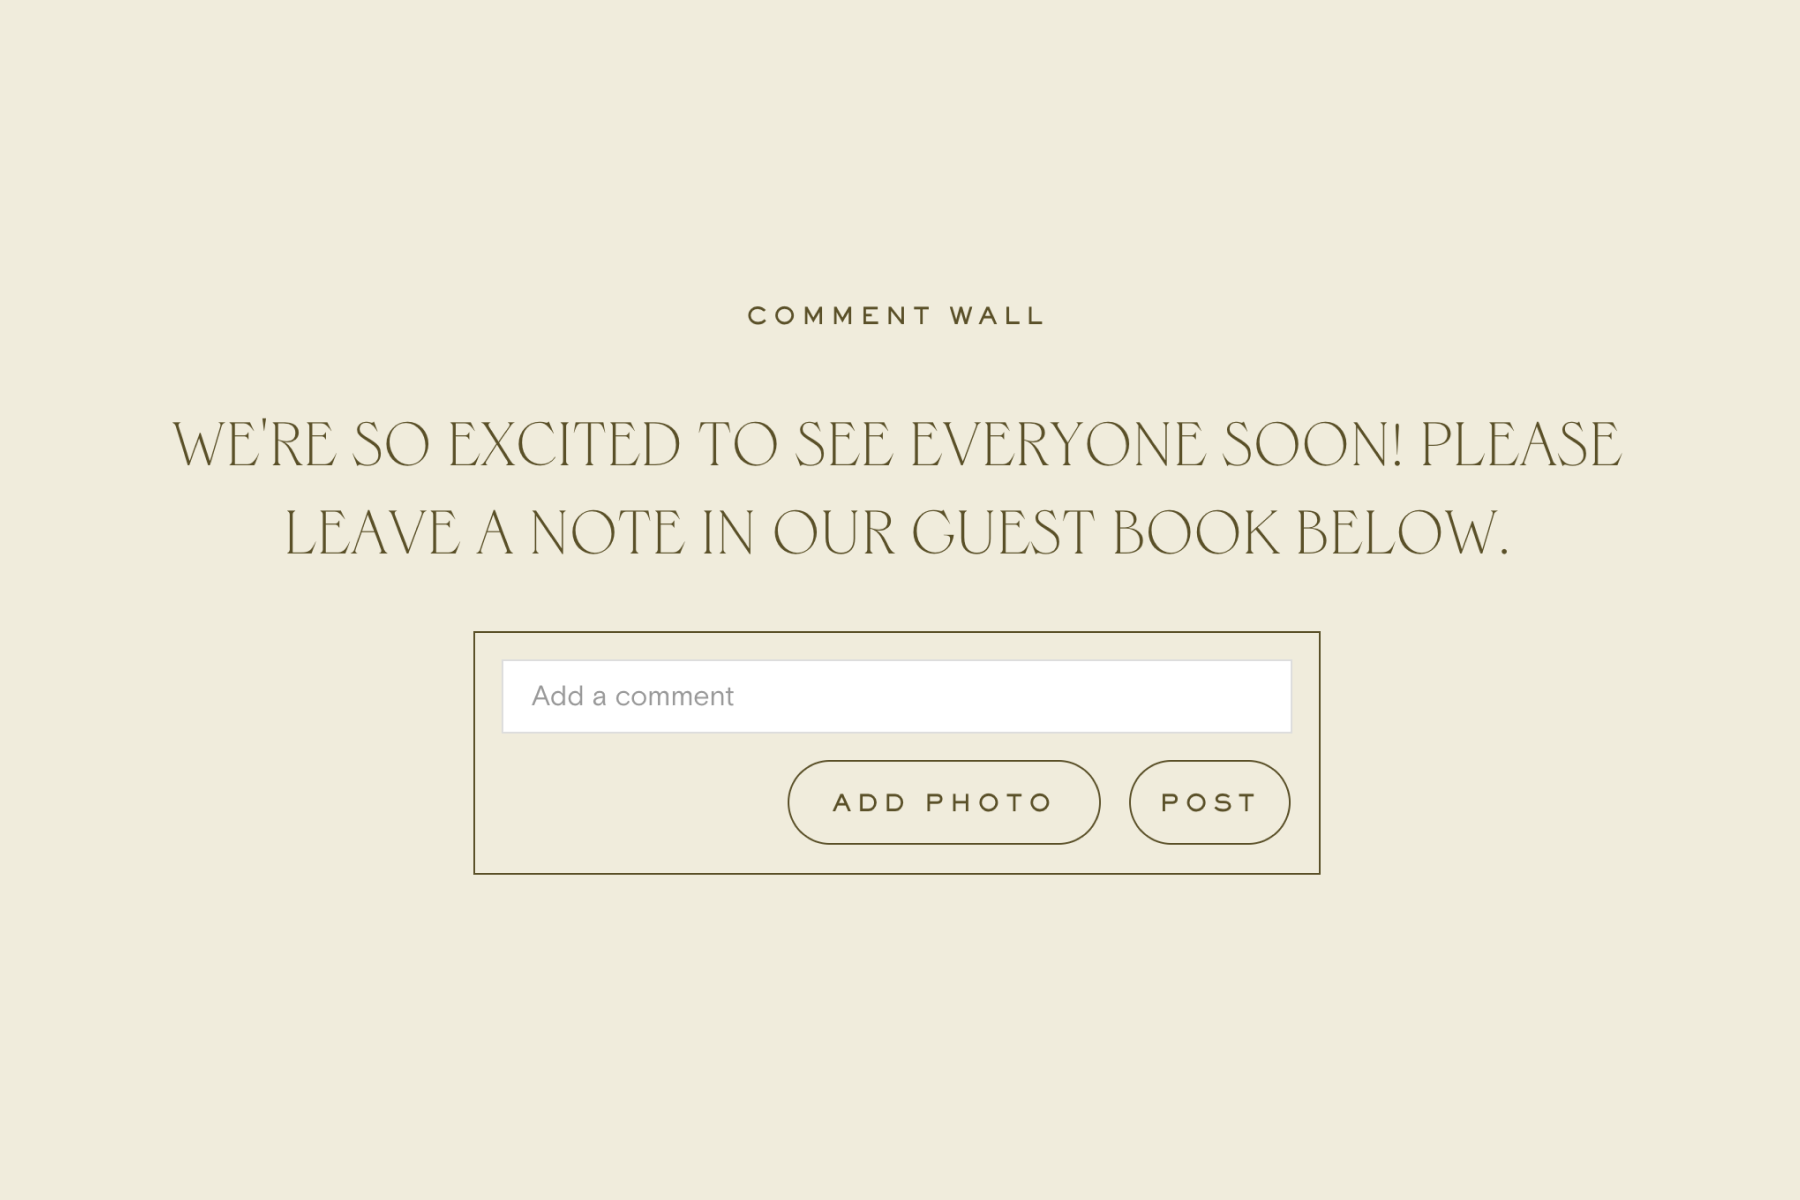 A UI image shows a box for a wedding guest to add words or a photo to a comment wall.